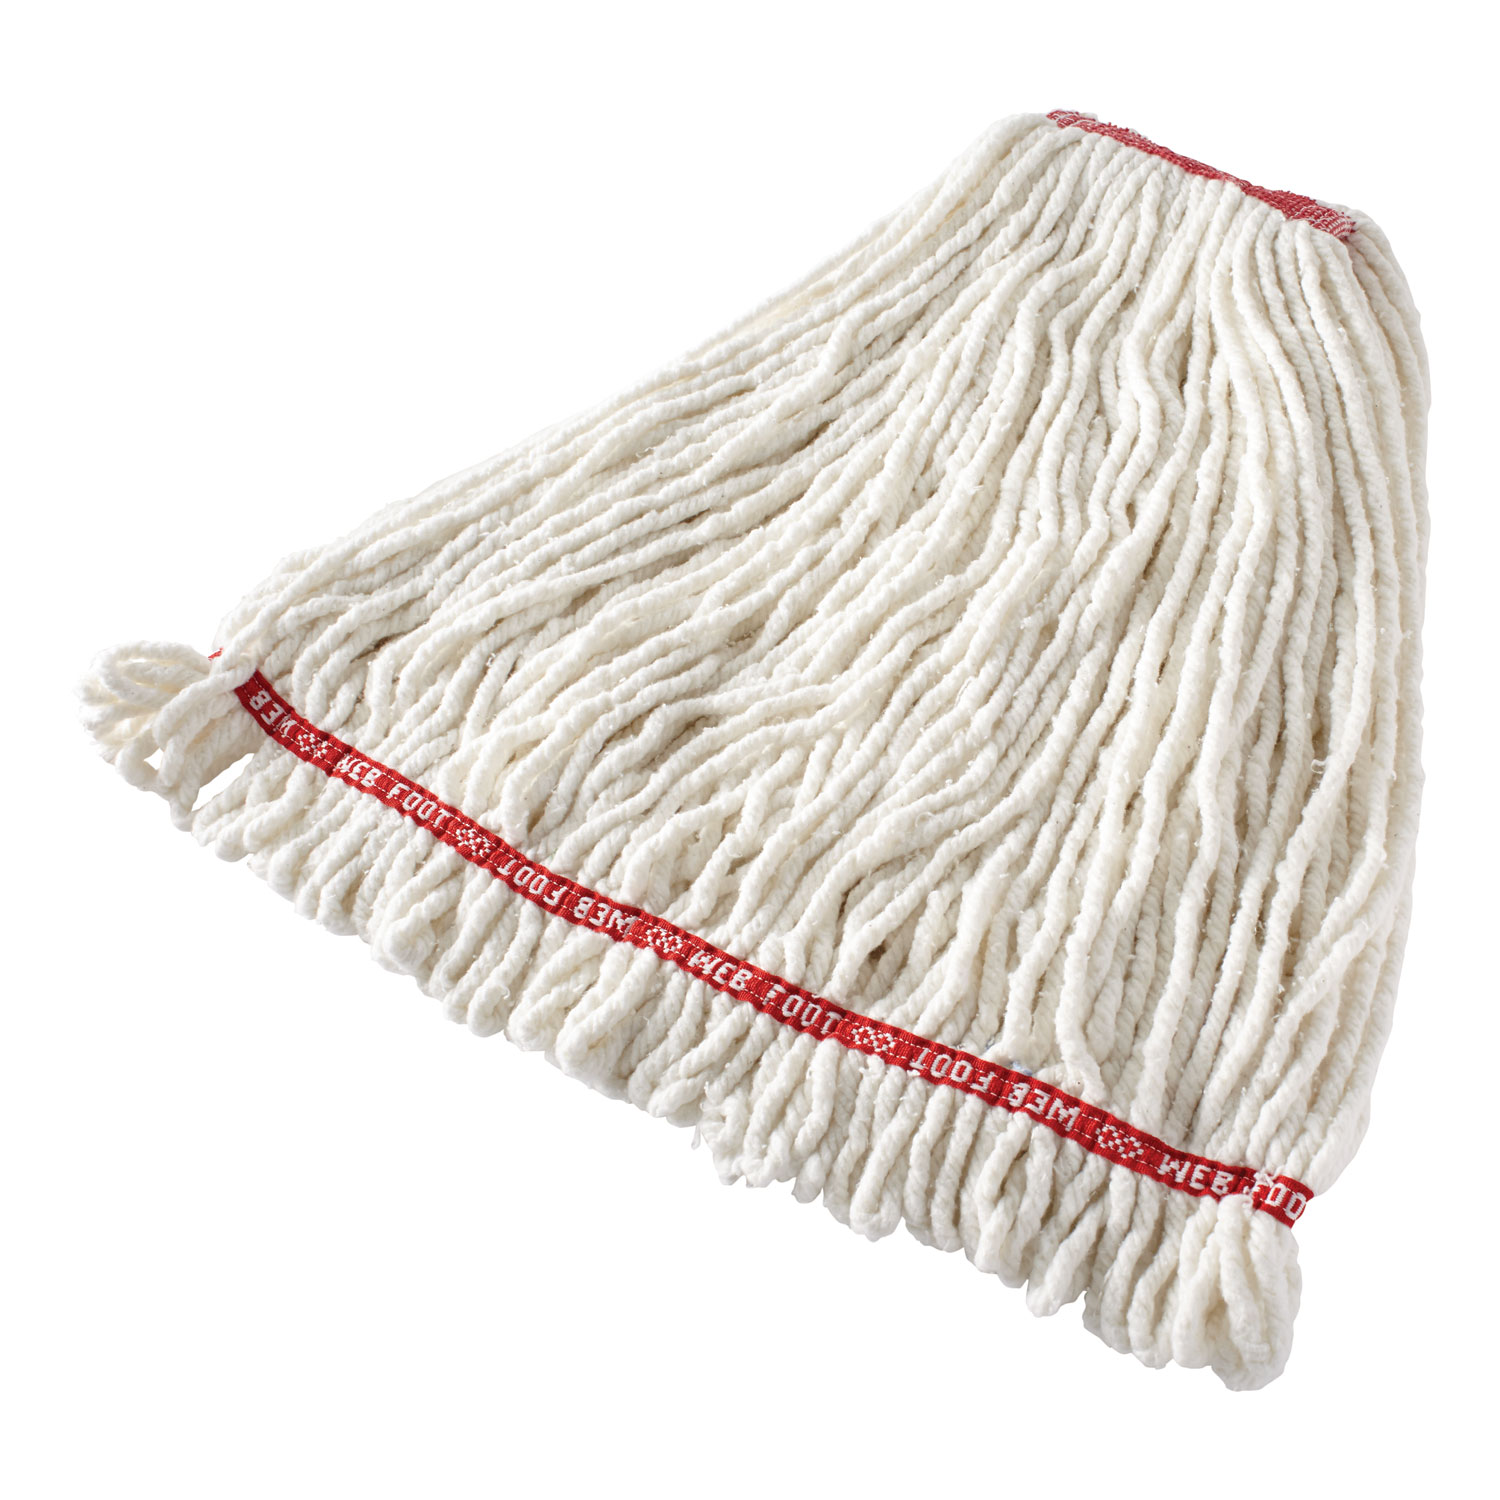  Rubbermaid Commercial FGA21306WH00 Web Foot Shrinkless Looped-End Wet Mop Head, Cotton/Synthetic, Large, White, 1 White Headband (RCPA21306WH00) 